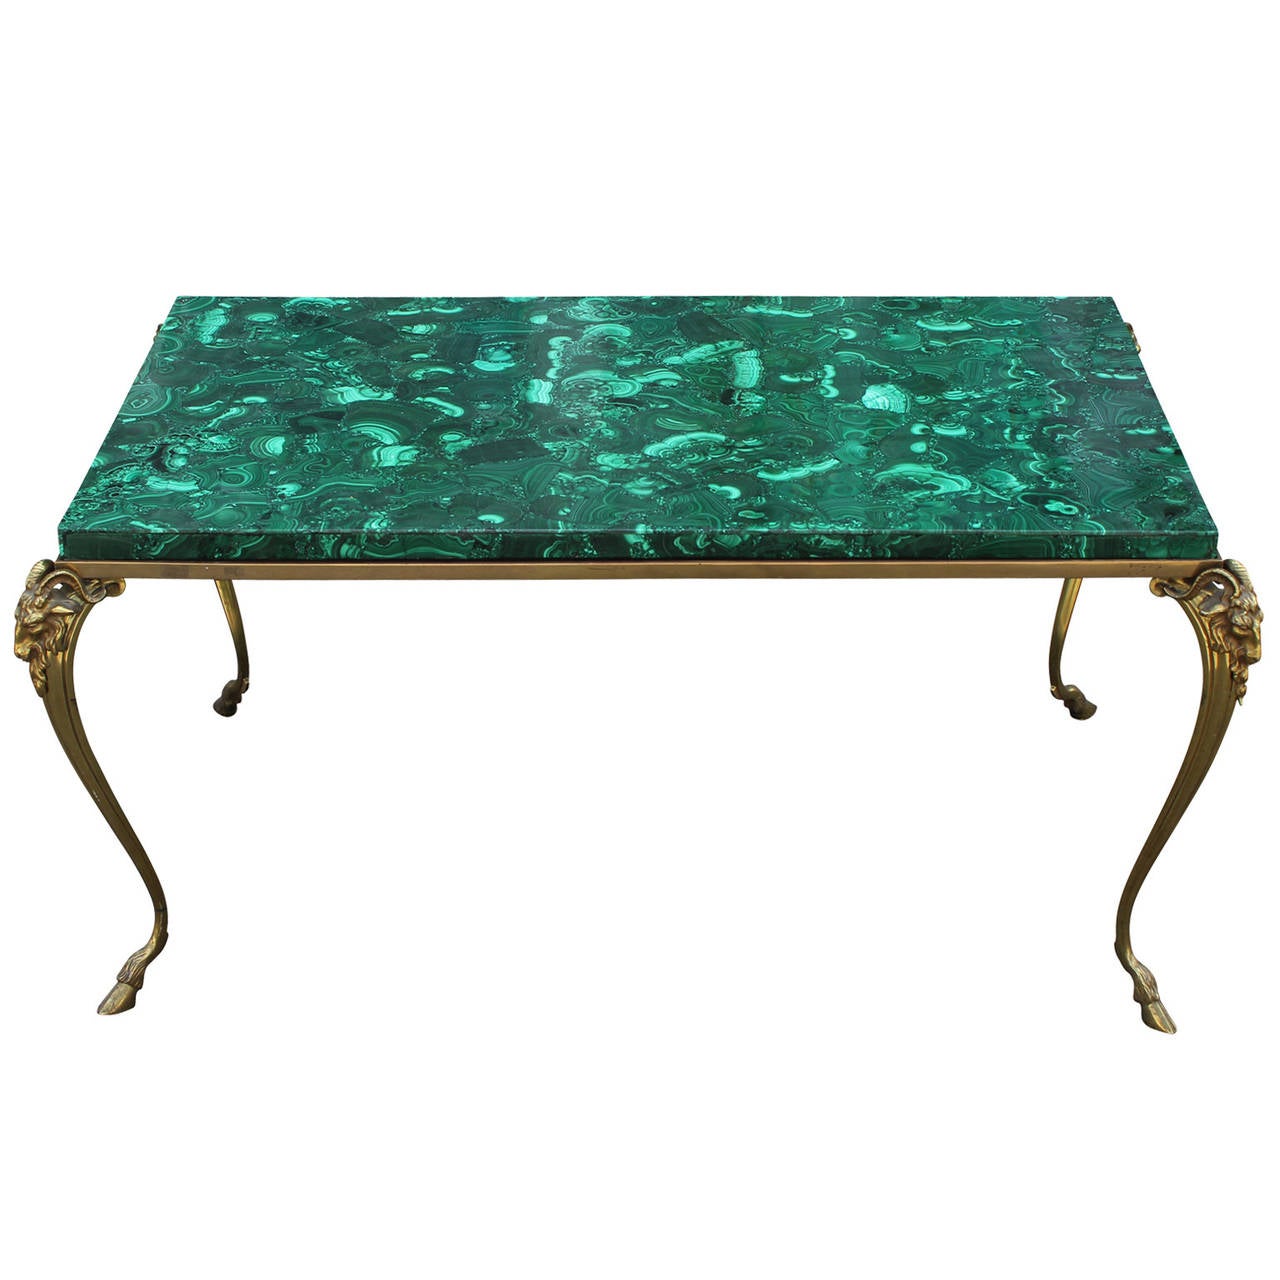 Absolutely stunning malachite topped brass french table with rams heads and feet. Table was made in early 20th century. Malachite top is stunning.